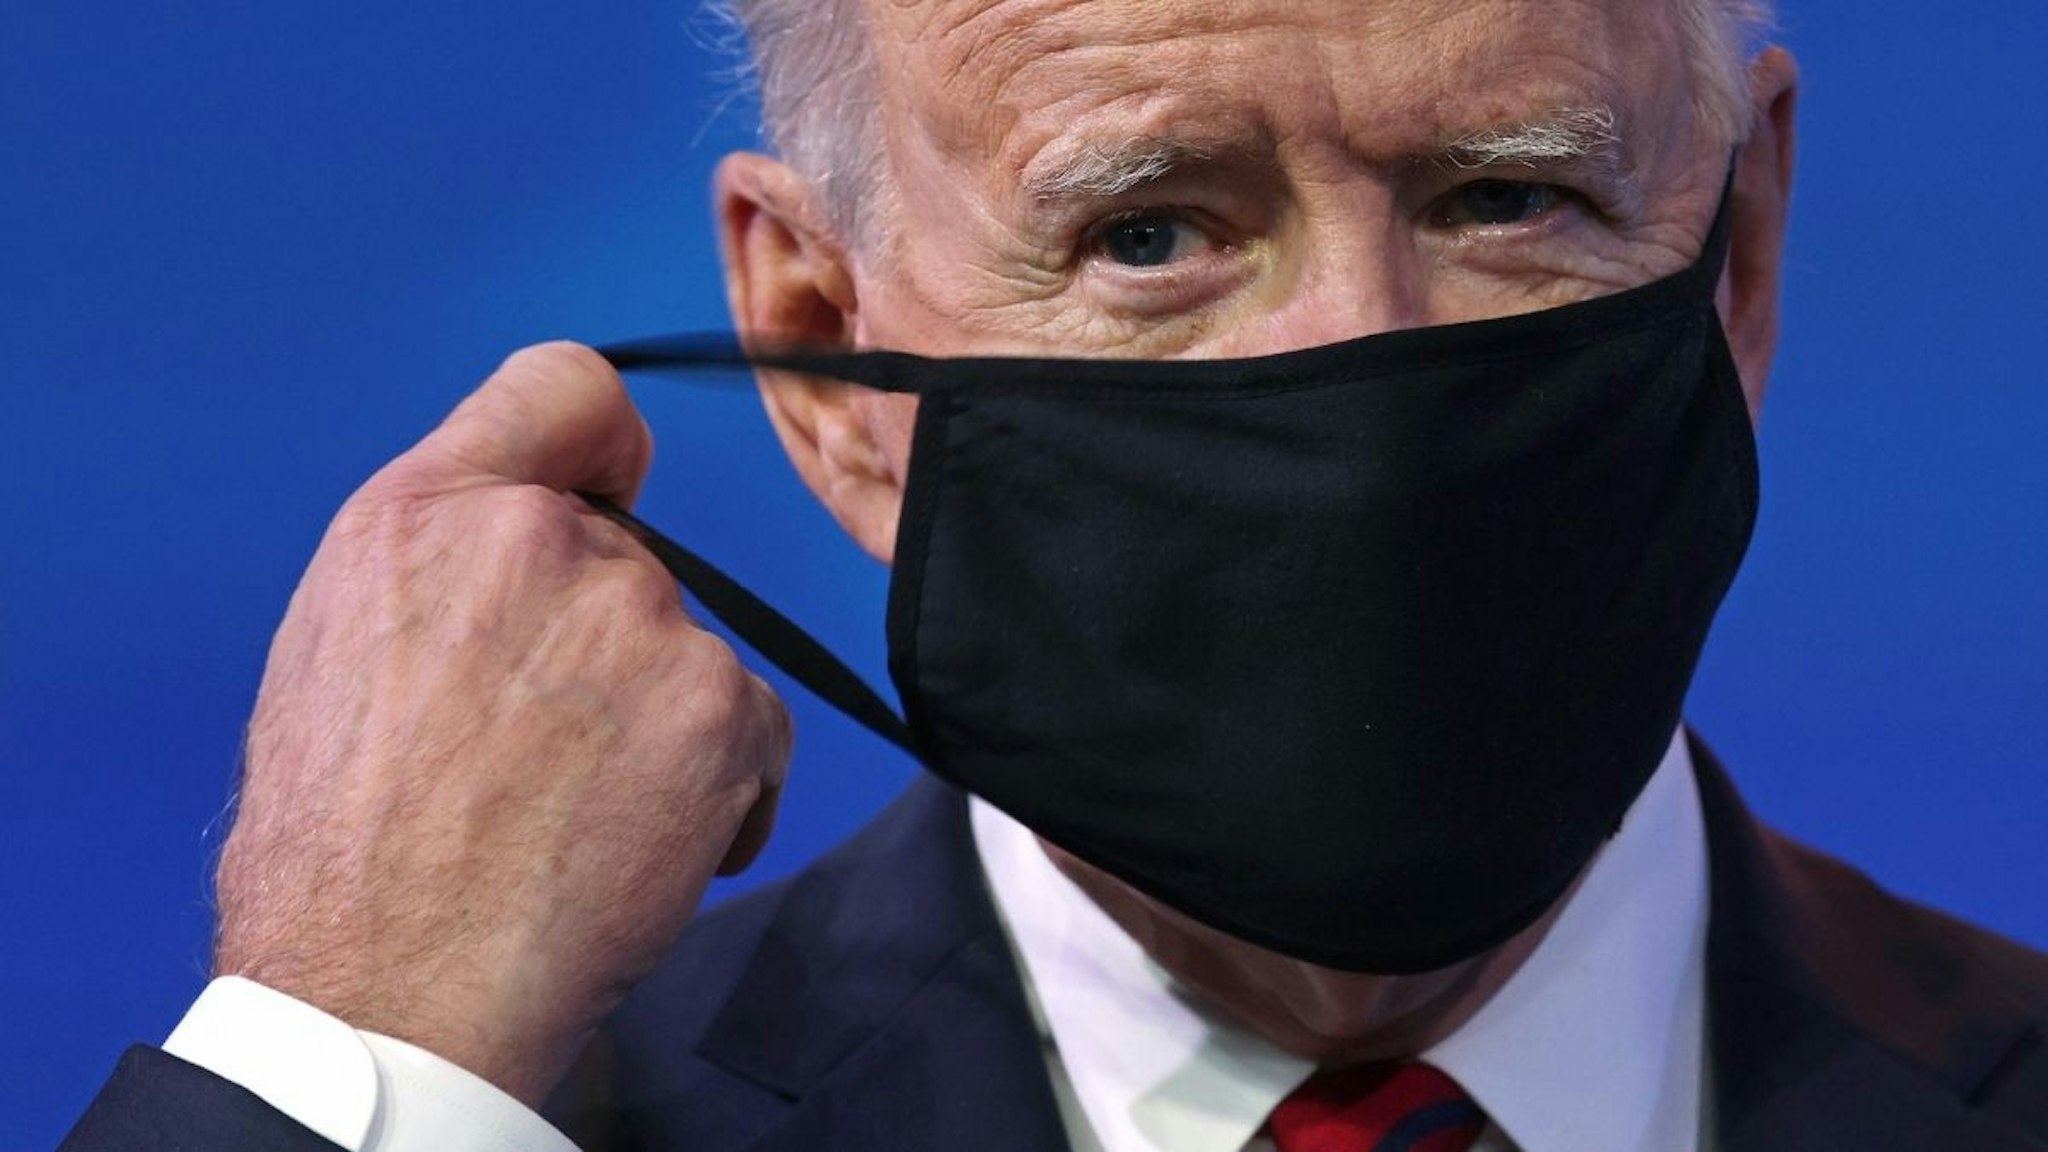 Then-U.S. President-elect Joe Biden takes off his mask as he arrives at the Queen theater to lay out his plan on combating the coronavirus January 15, 2021 in Wilmington, Delaware.